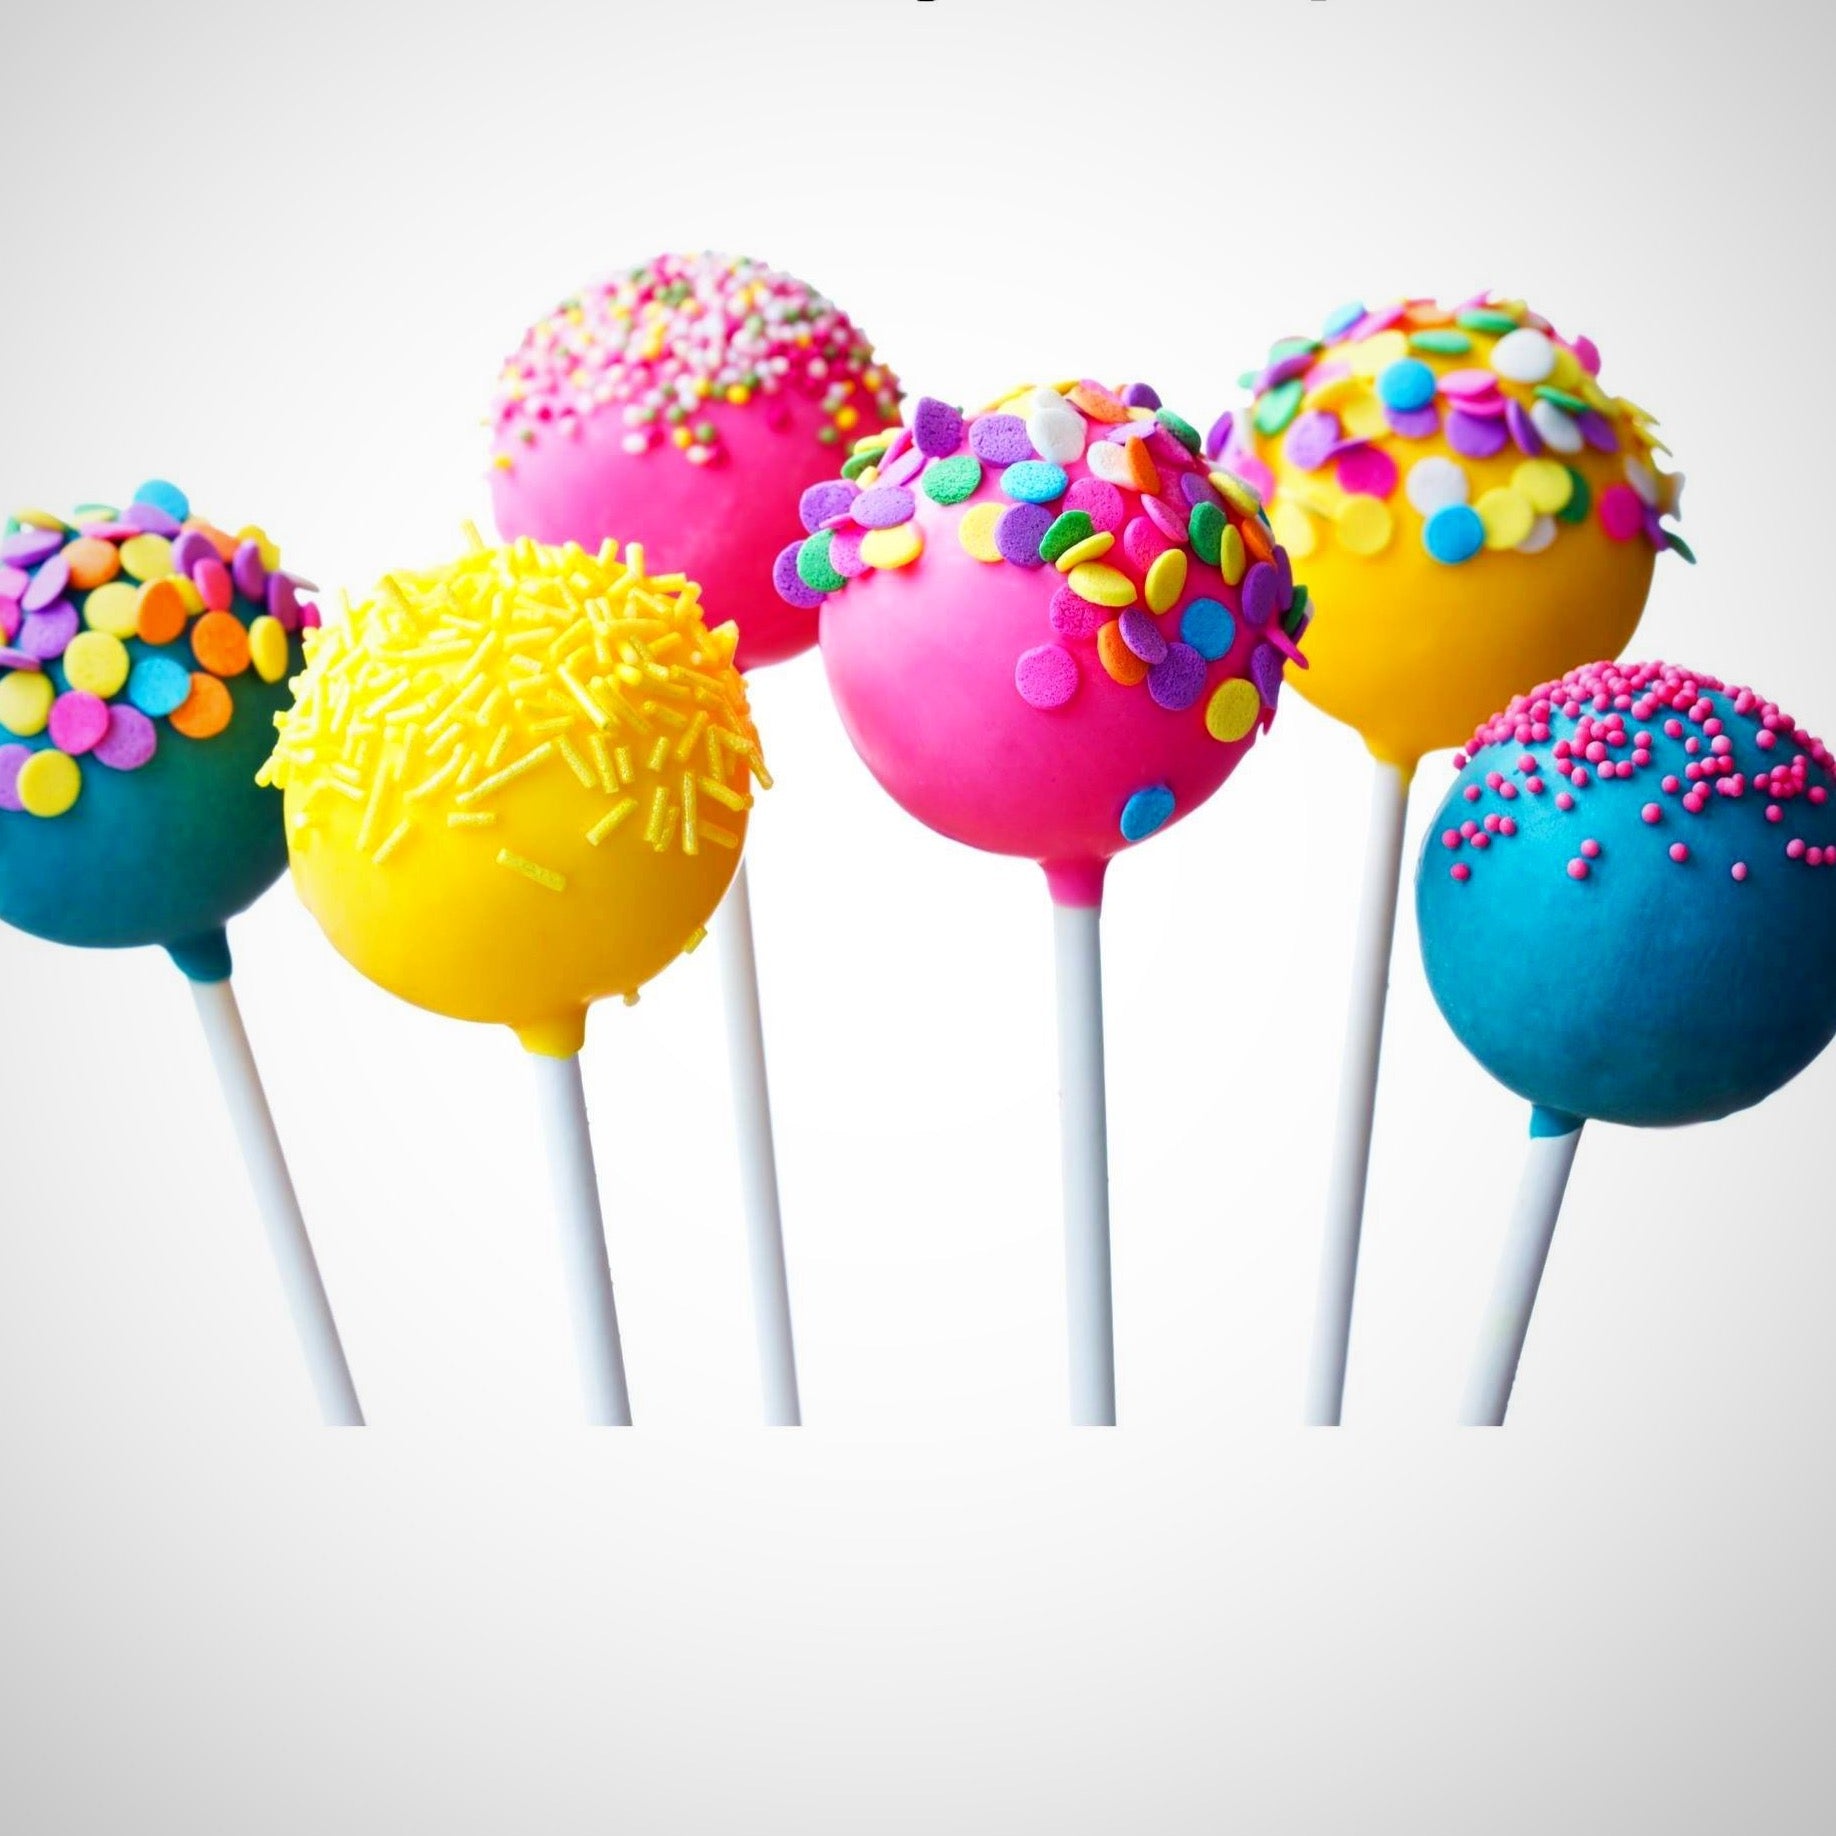 Buy Cake Pops For Father's Day - Cake Pops Parties